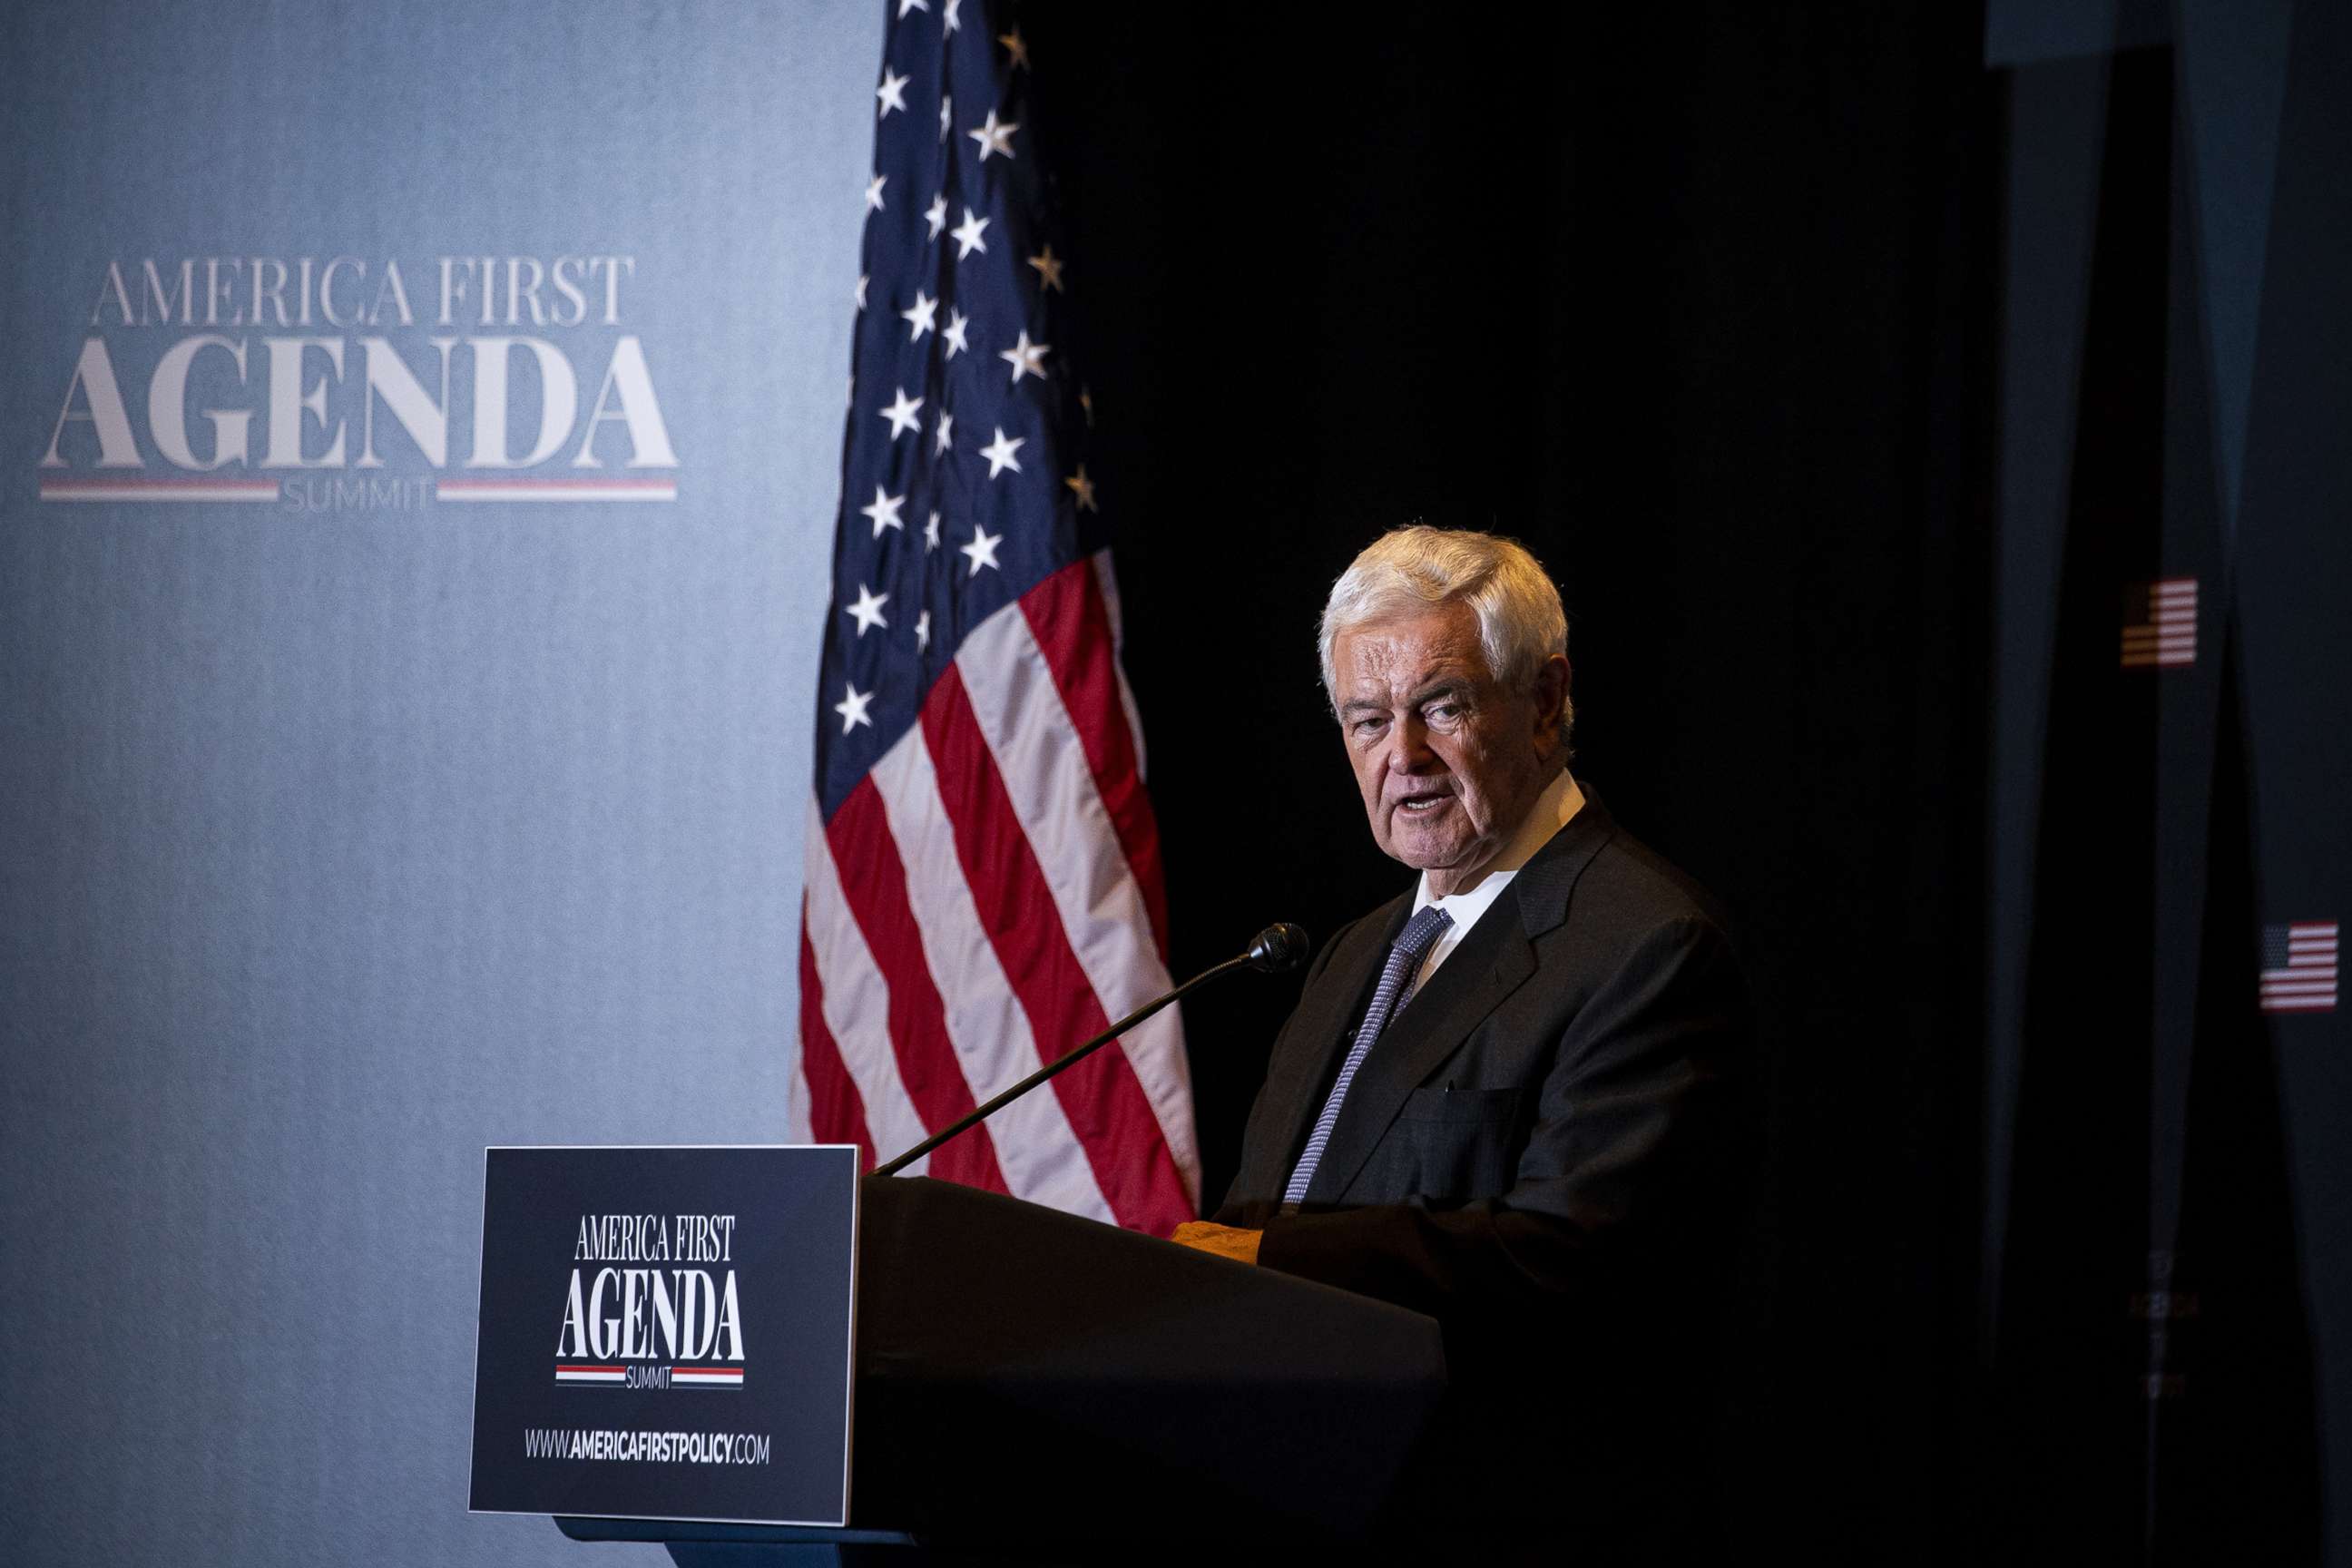 PHOTO: In this July 25, 2022, file photo, Newt Gingrich, former speaker of the US House of Representatives, speaks during the America First Policy Institute's America First Agenda summit in Washington, D.C.